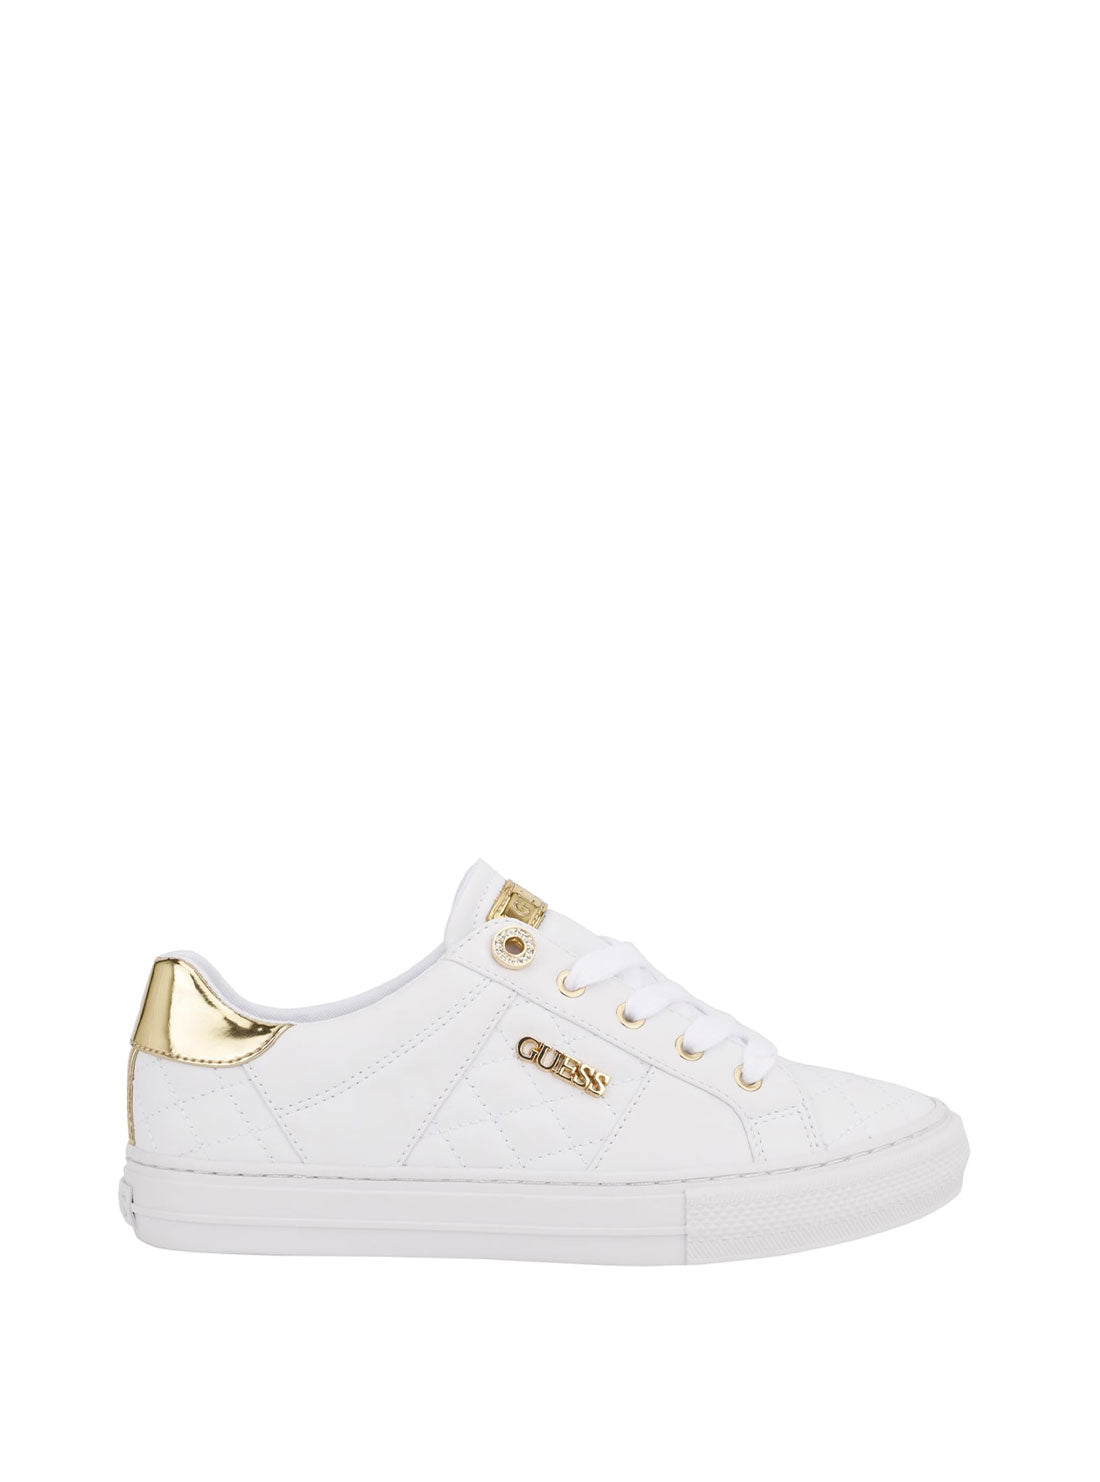 GUESS White Gold Loven Low-Top Sneakers side view